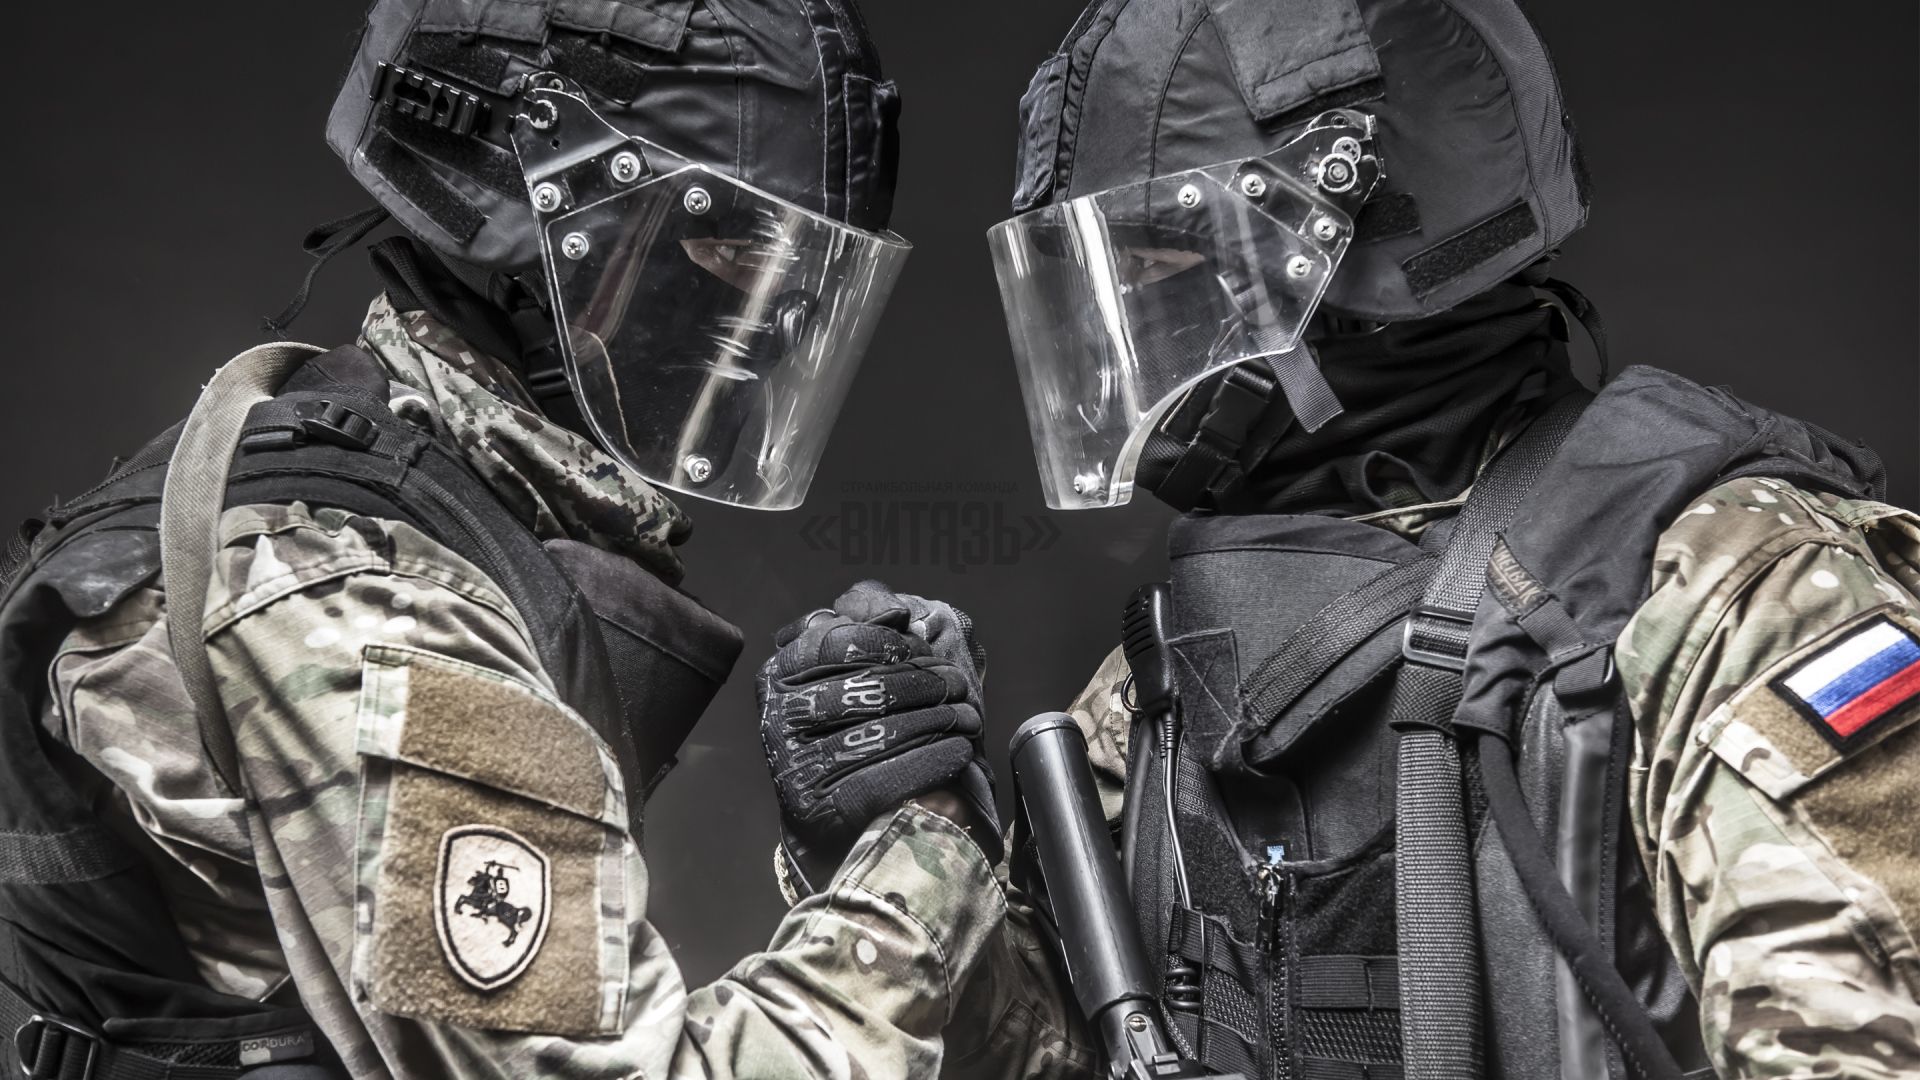 Special Forces soldiers Knight Desktop wallpaper 1920x1080